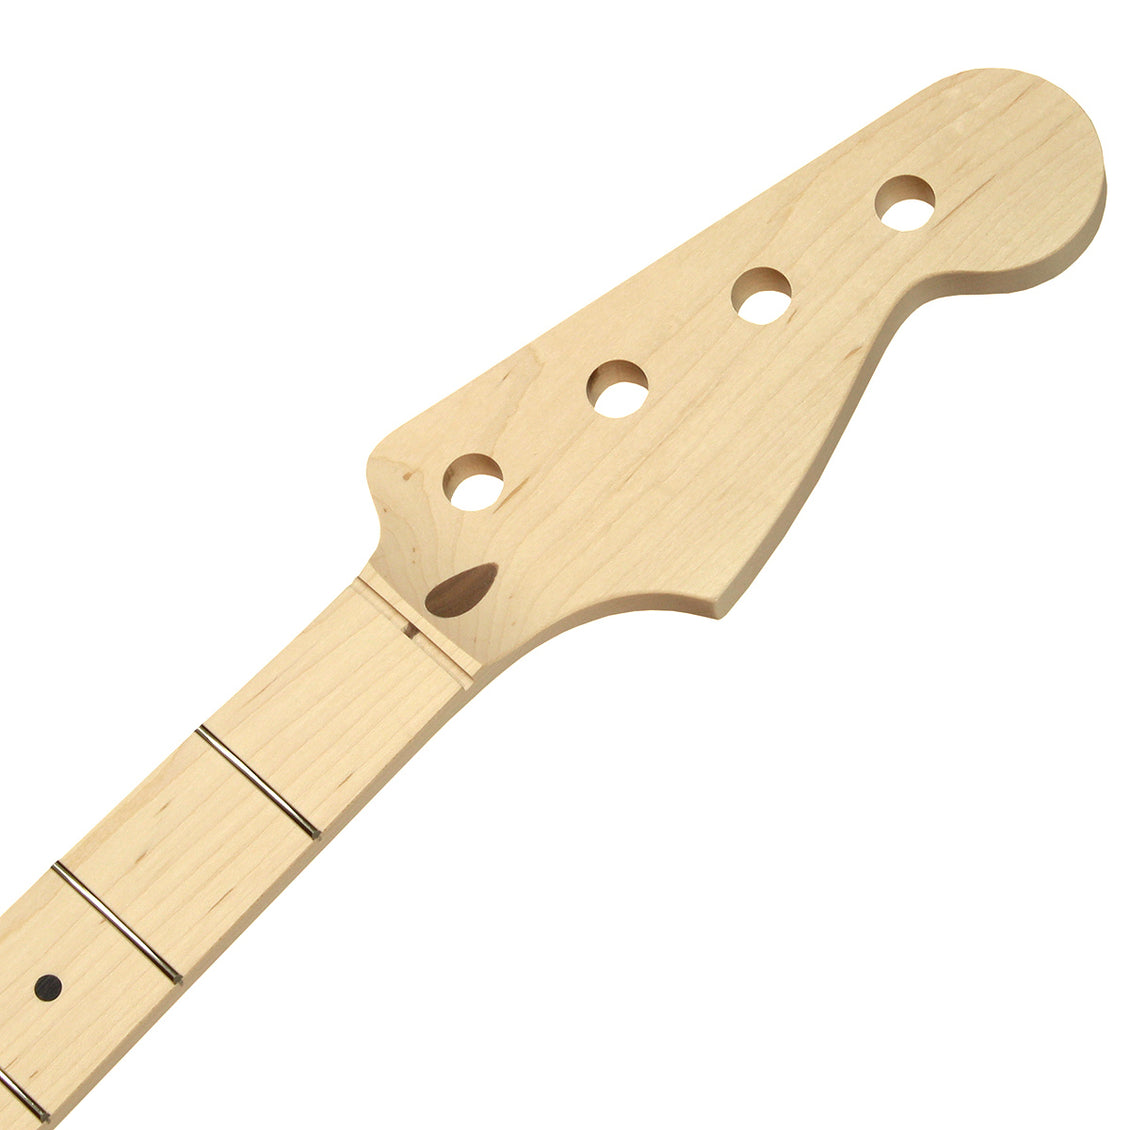 Jazz Bass Replacement Neck, No Finish, Maple